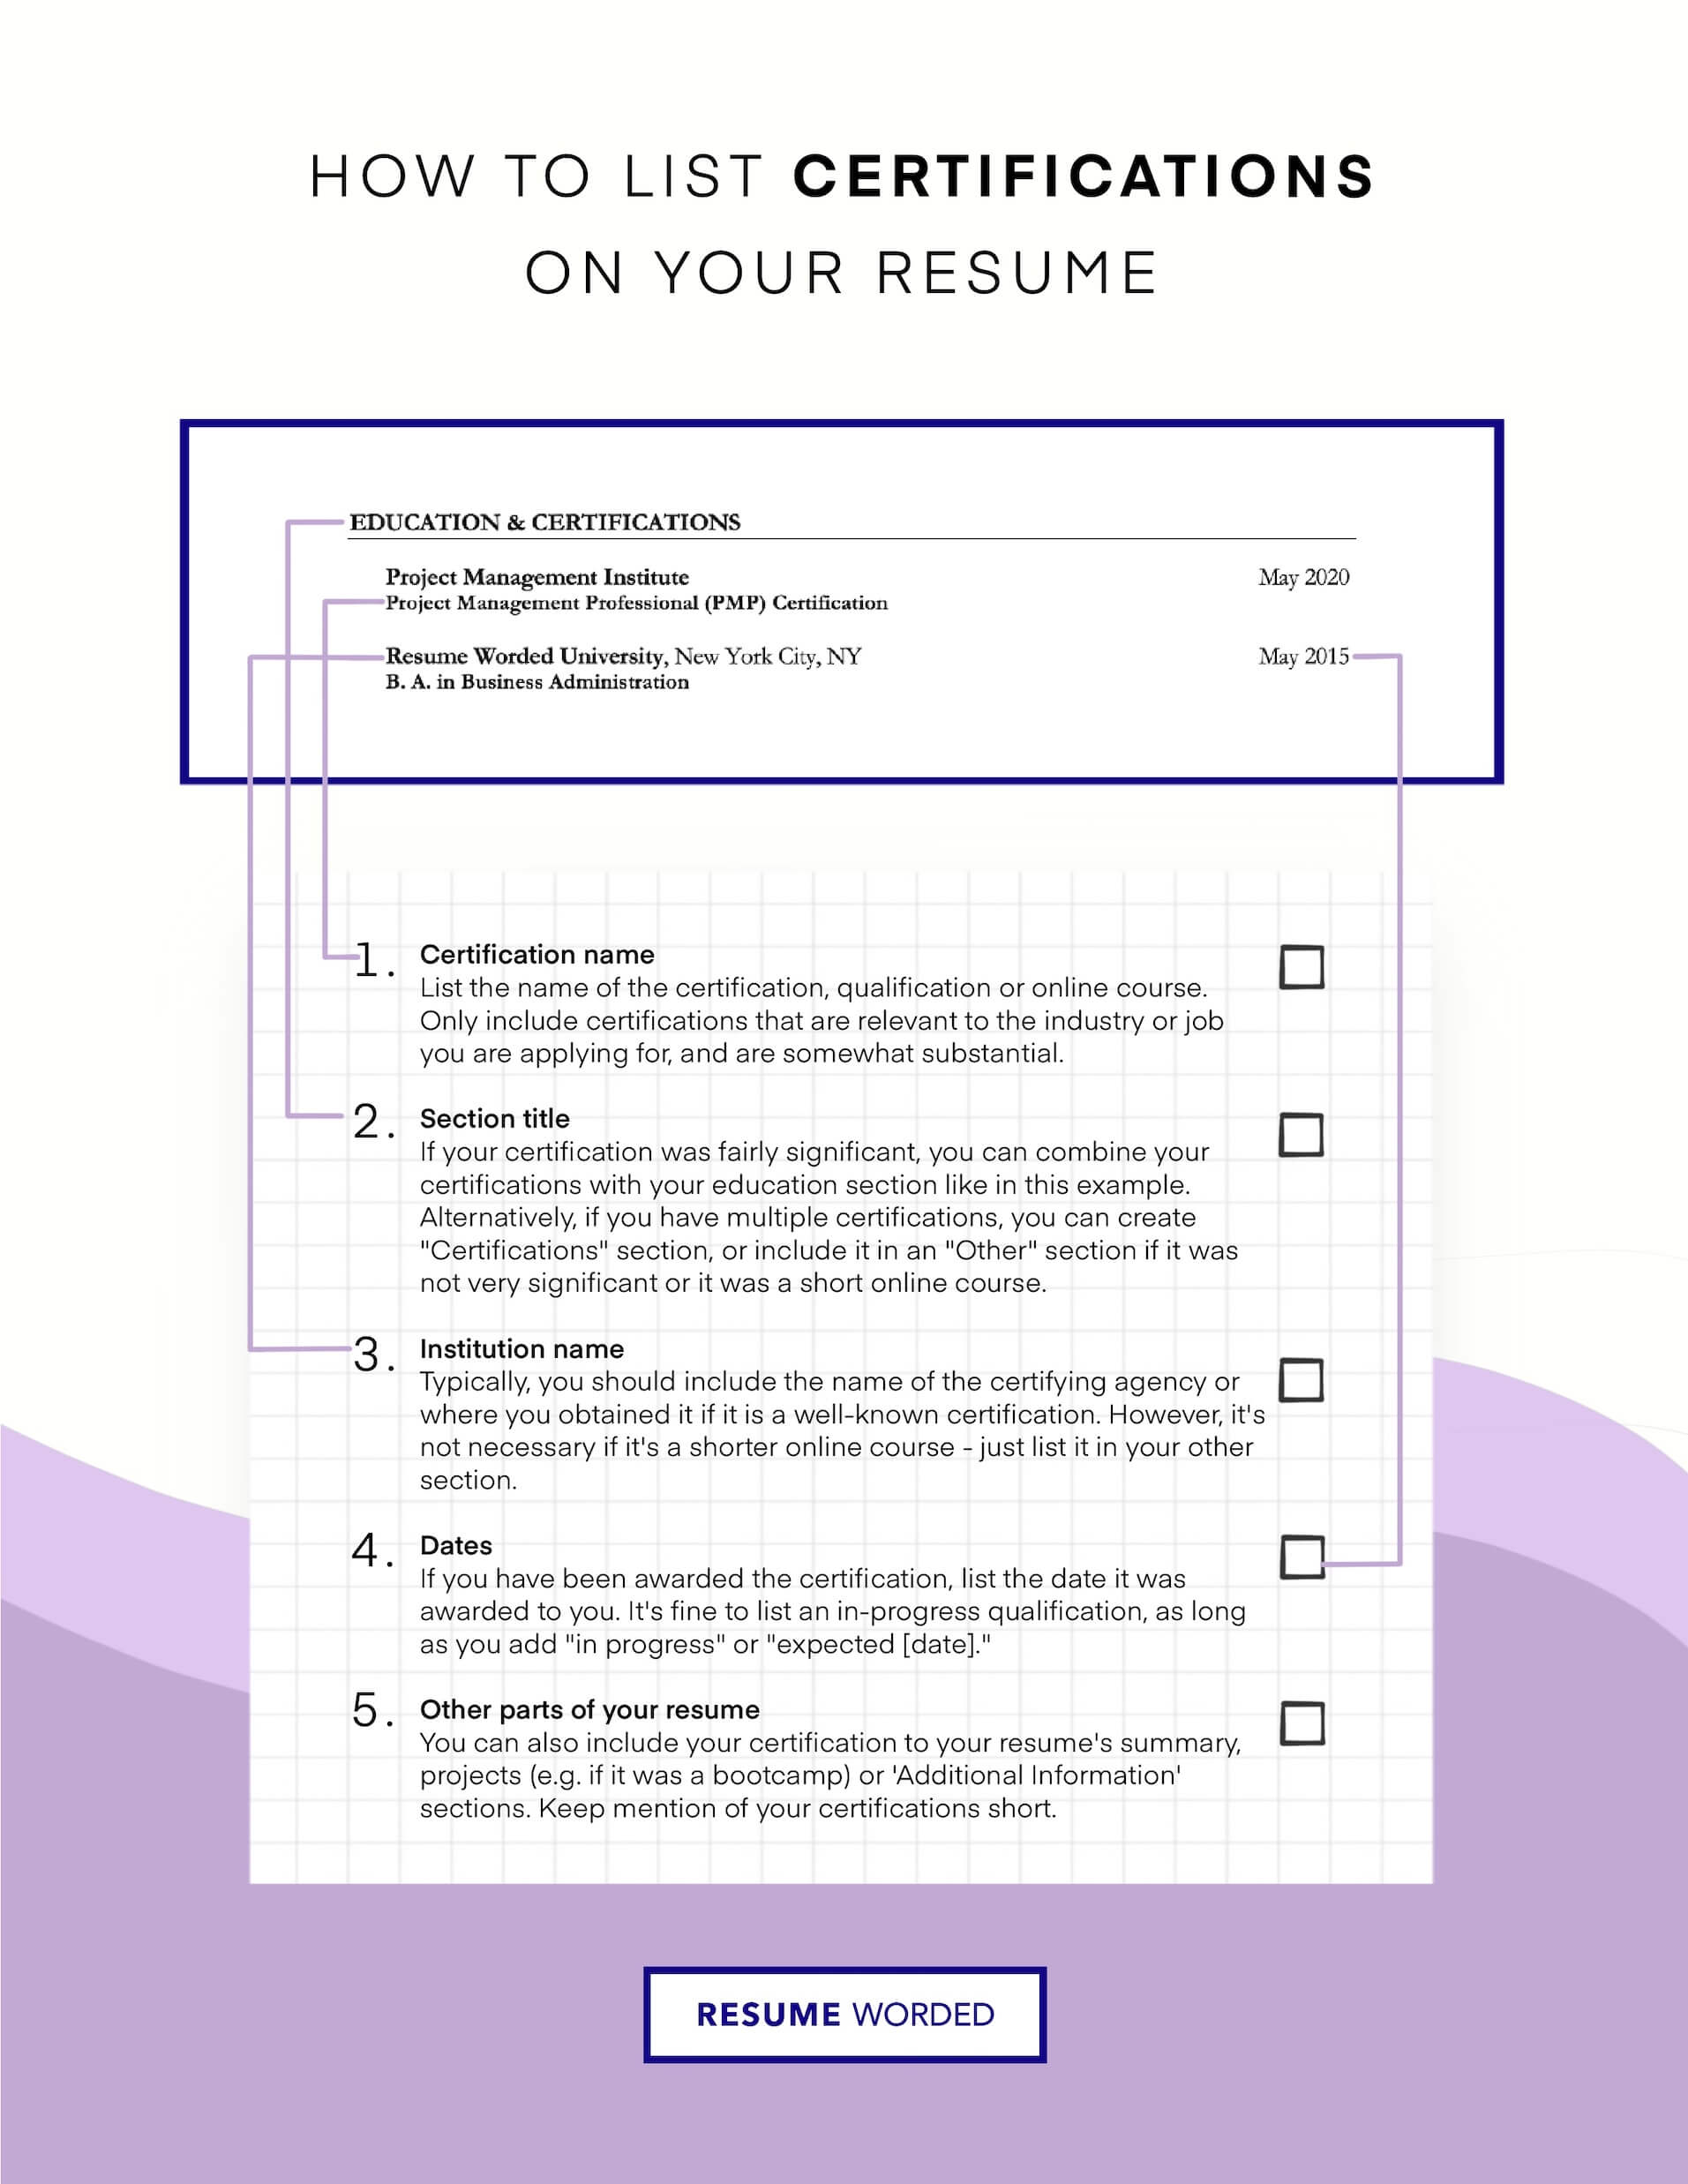 Include any relevant IT certification. - Implementation Specialist Resume